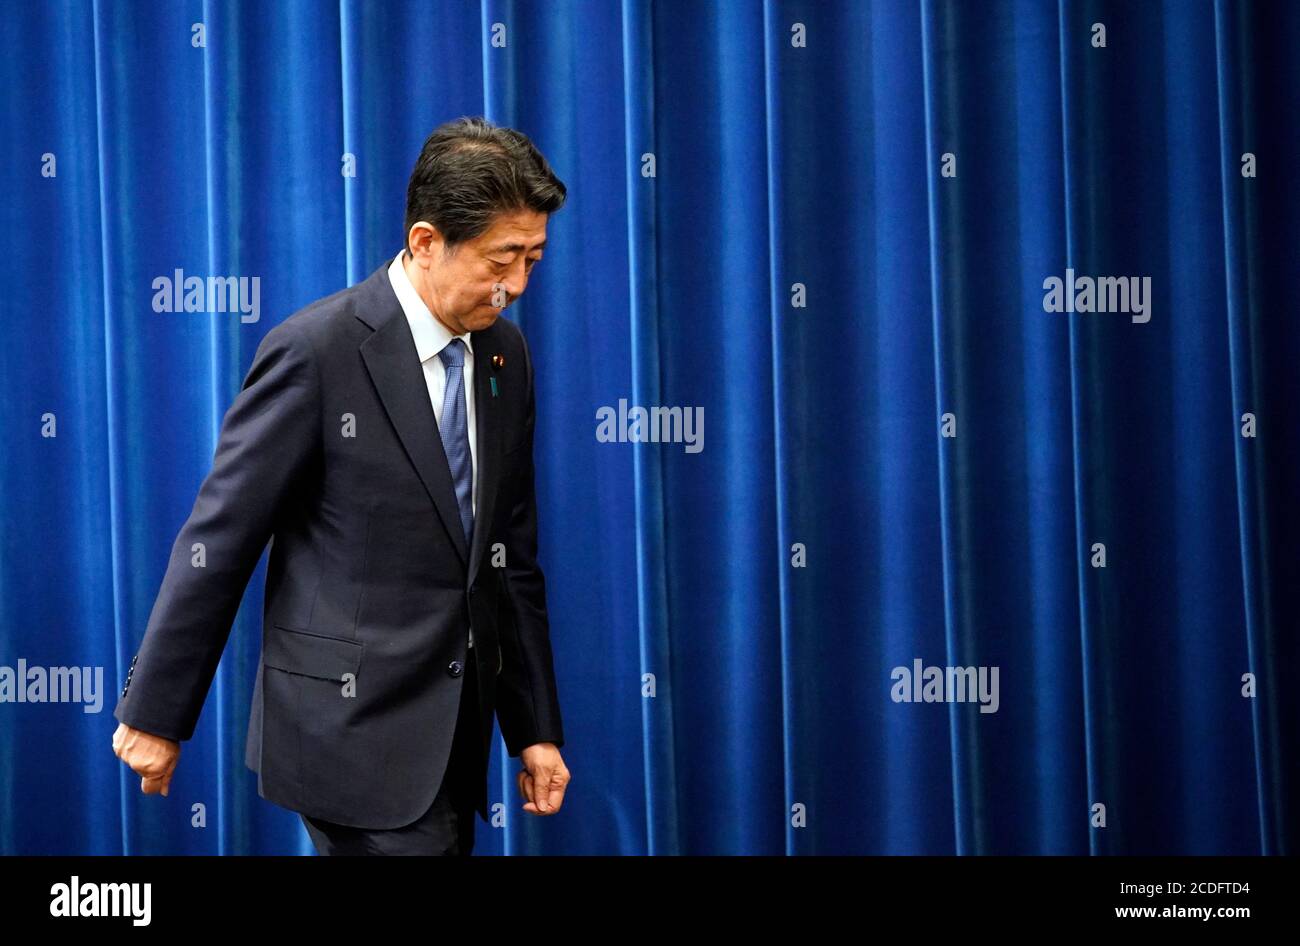 Tokyo, Japan. 28th Aug, 2020. Japanese Prime Minister Shinzo Abe leaves after a press conference in Tokyo, Japan, Aug. 28, 2020. Japanese Prime Minister Shinzo Abe said at a press conference Friday that he would step down from his post due to health concerns. (Franck Robichon/Pool via Xinhua) Credit: Xinhua/Alamy Live News Stock Photo